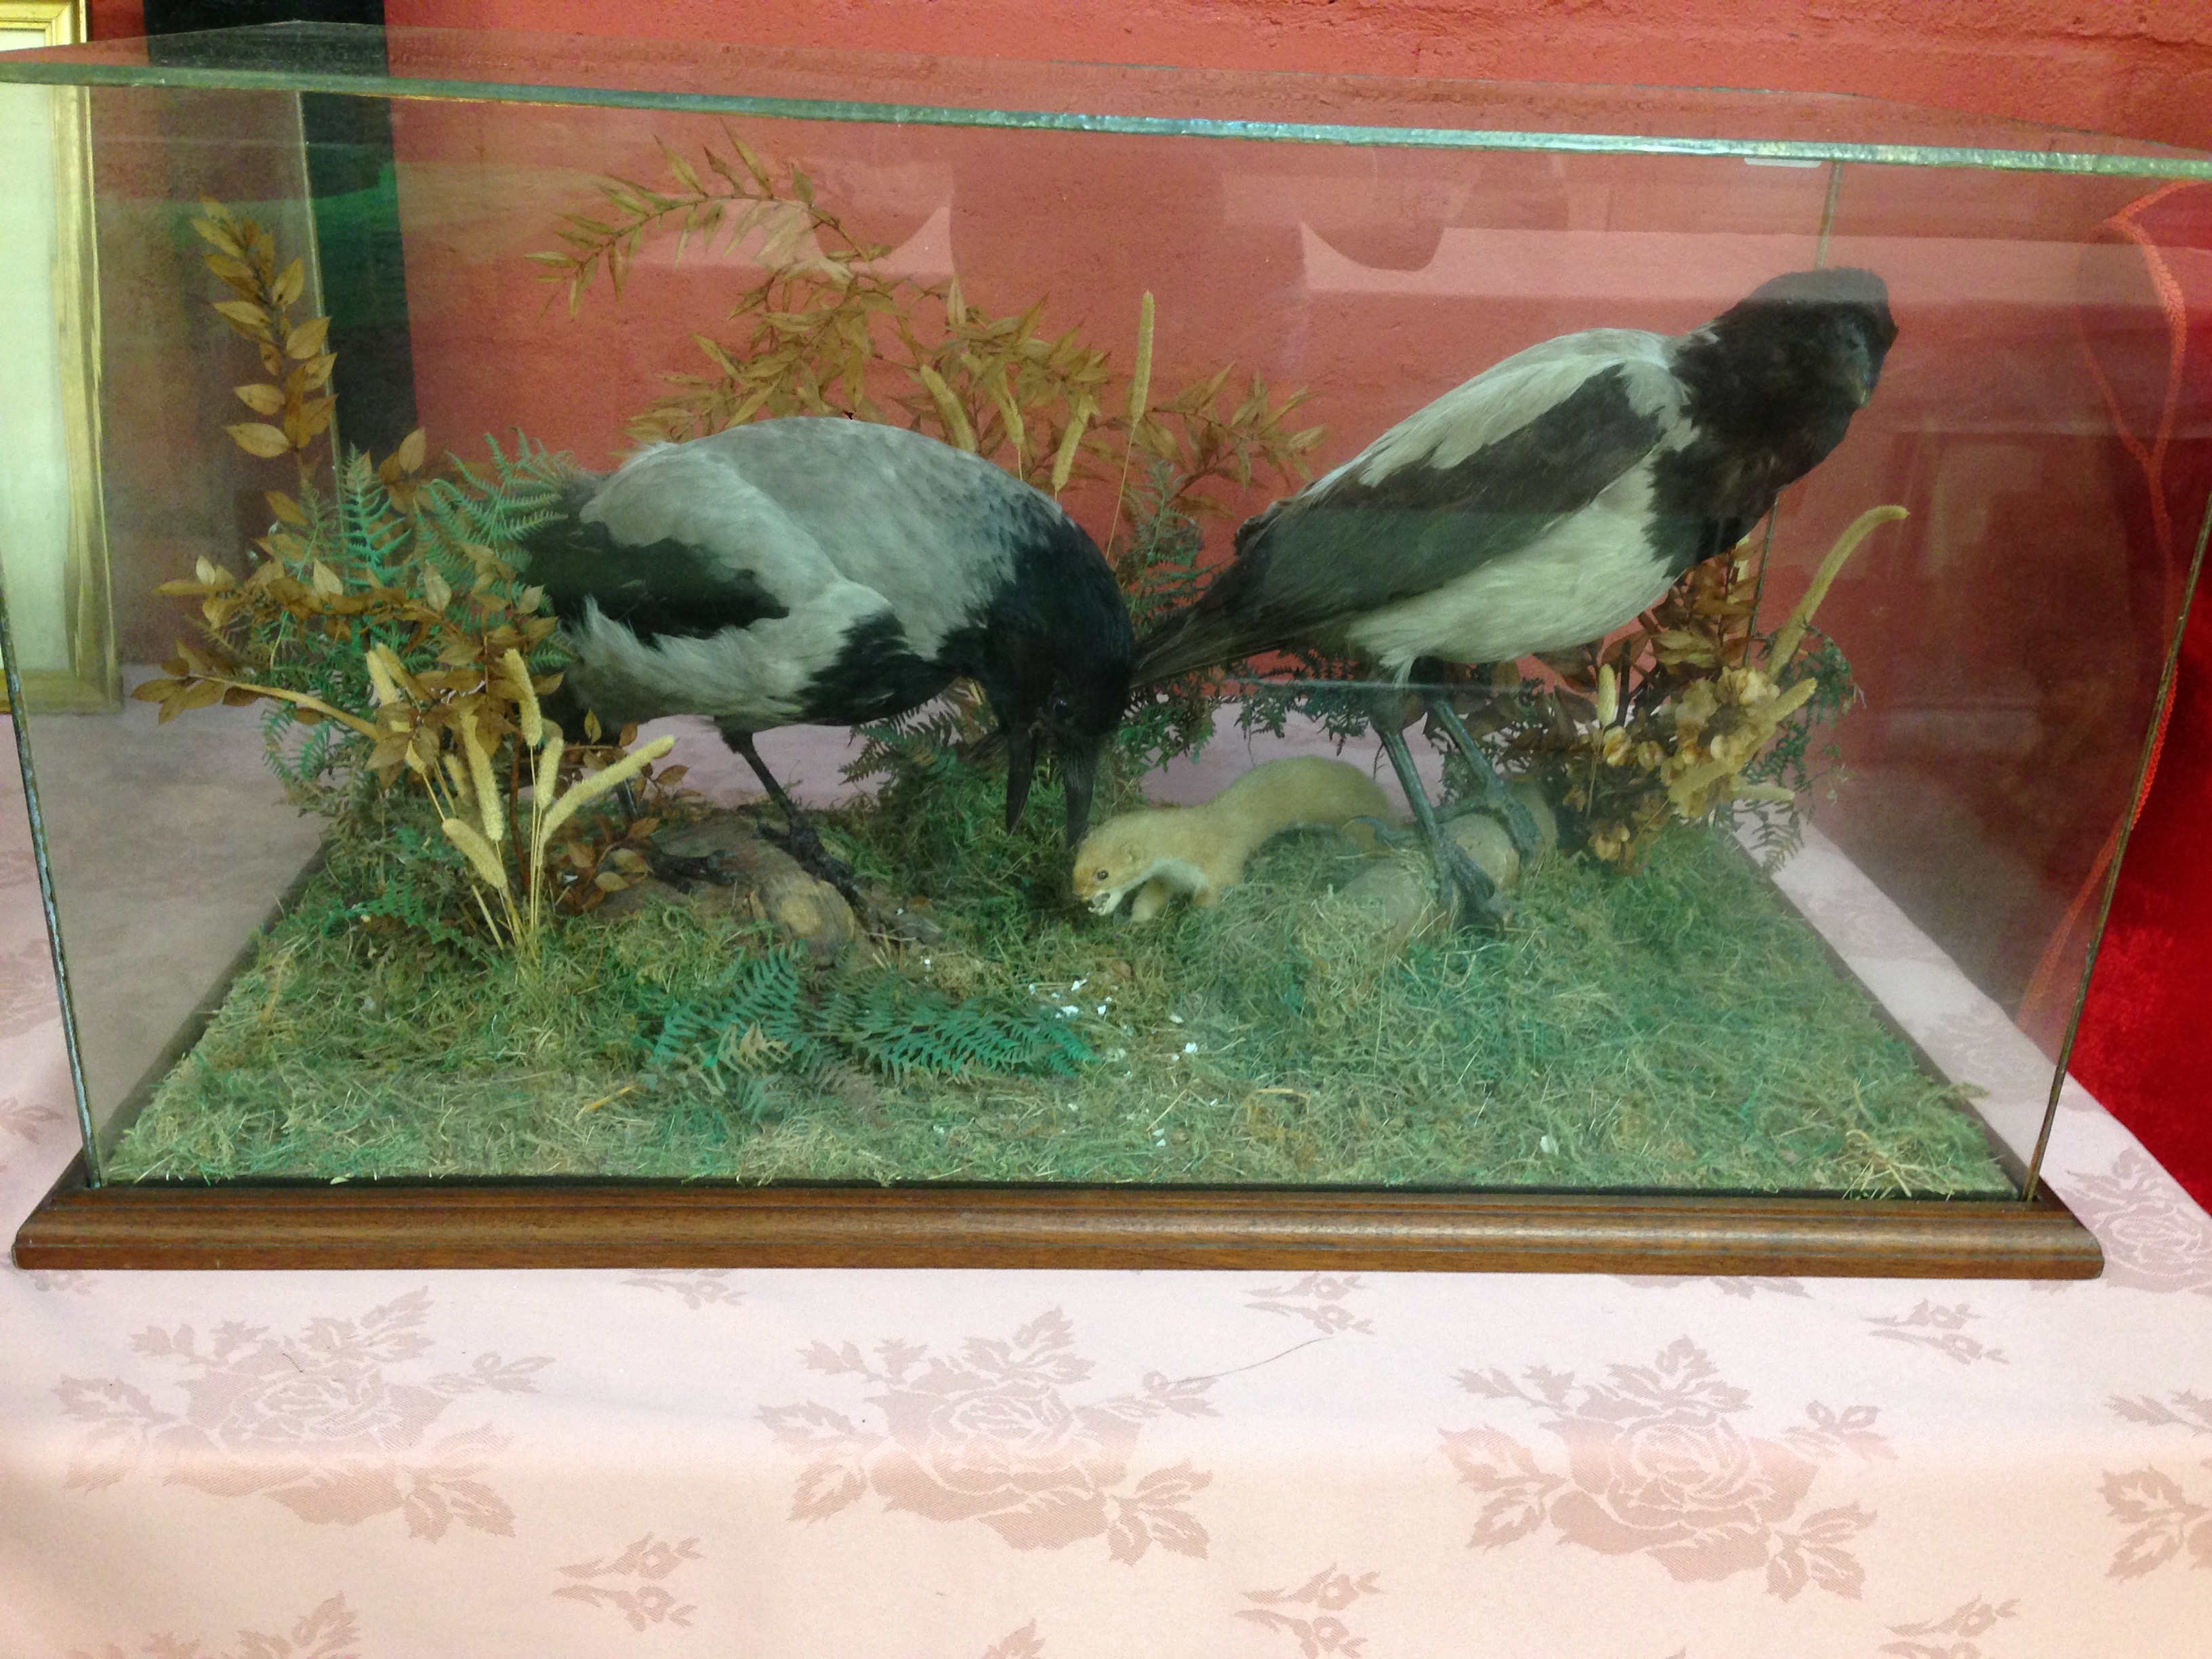 TAXIDERMY SPECIMEN "HOODED CROWS" IN A GLAZED CASE - Image 3 of 3